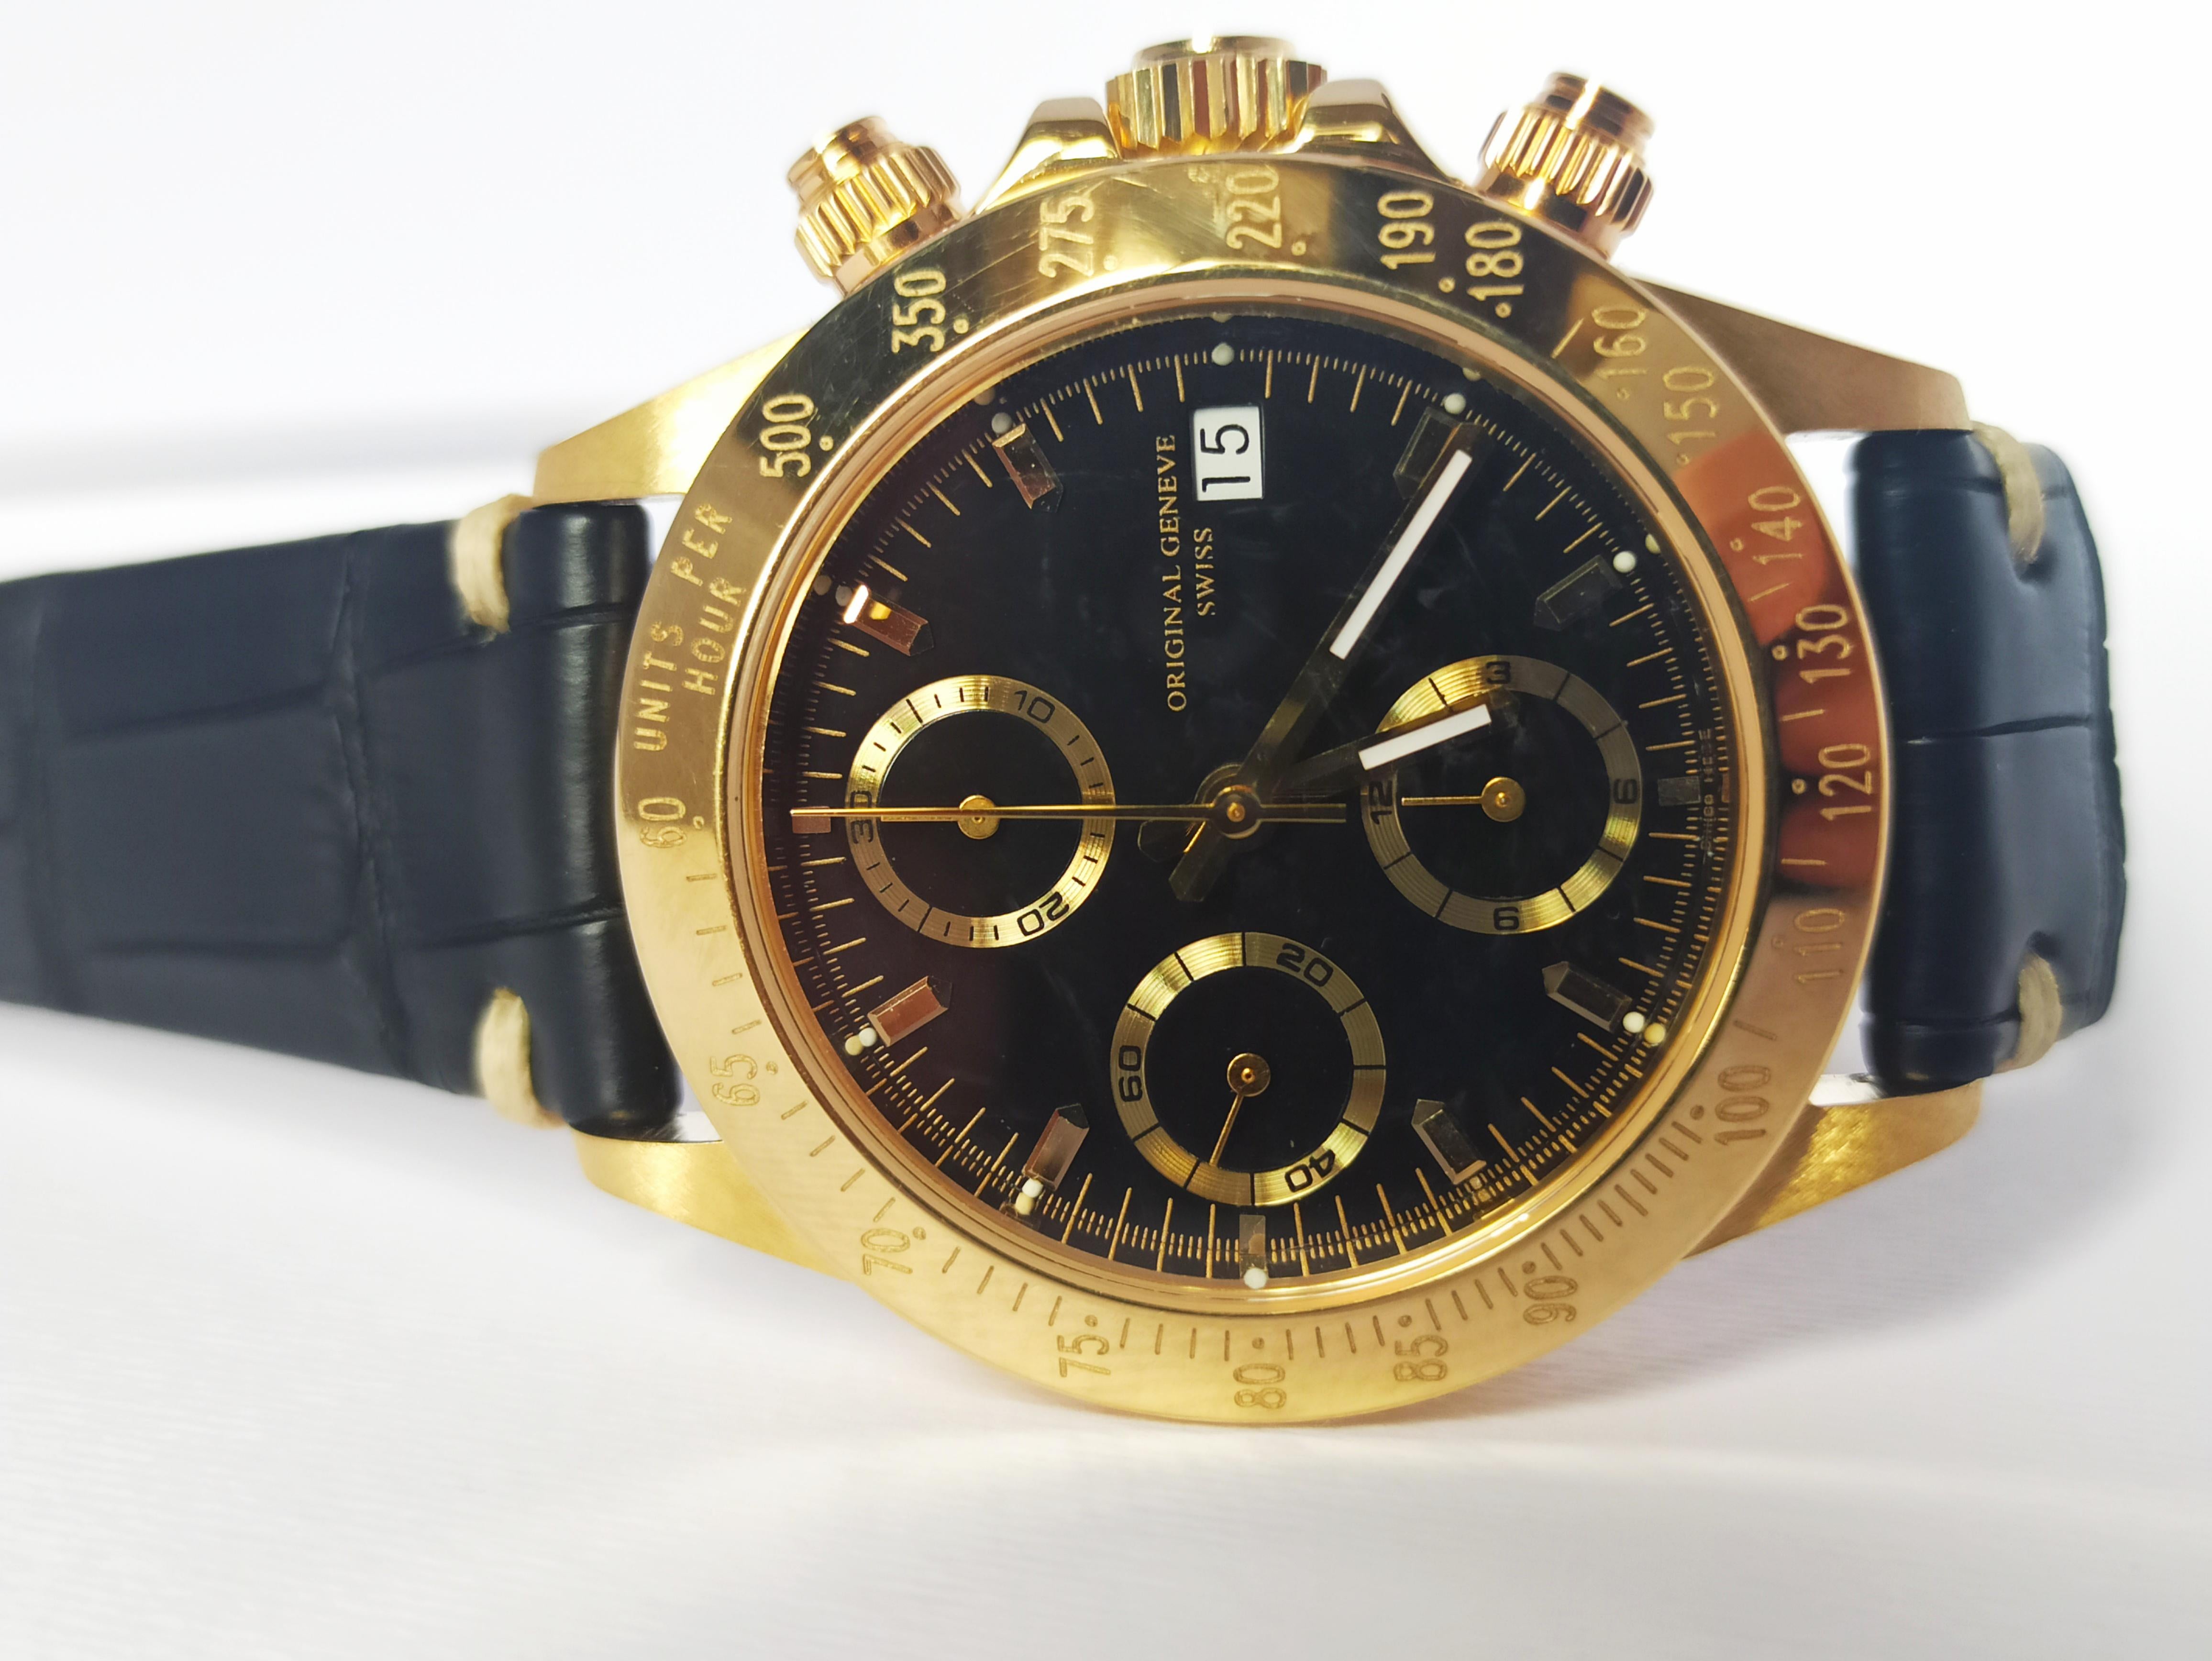 Giren Dupre' 18kt Solid Gold Daytona Style Chronograph, Leather Strap, Automatic For Sale 3